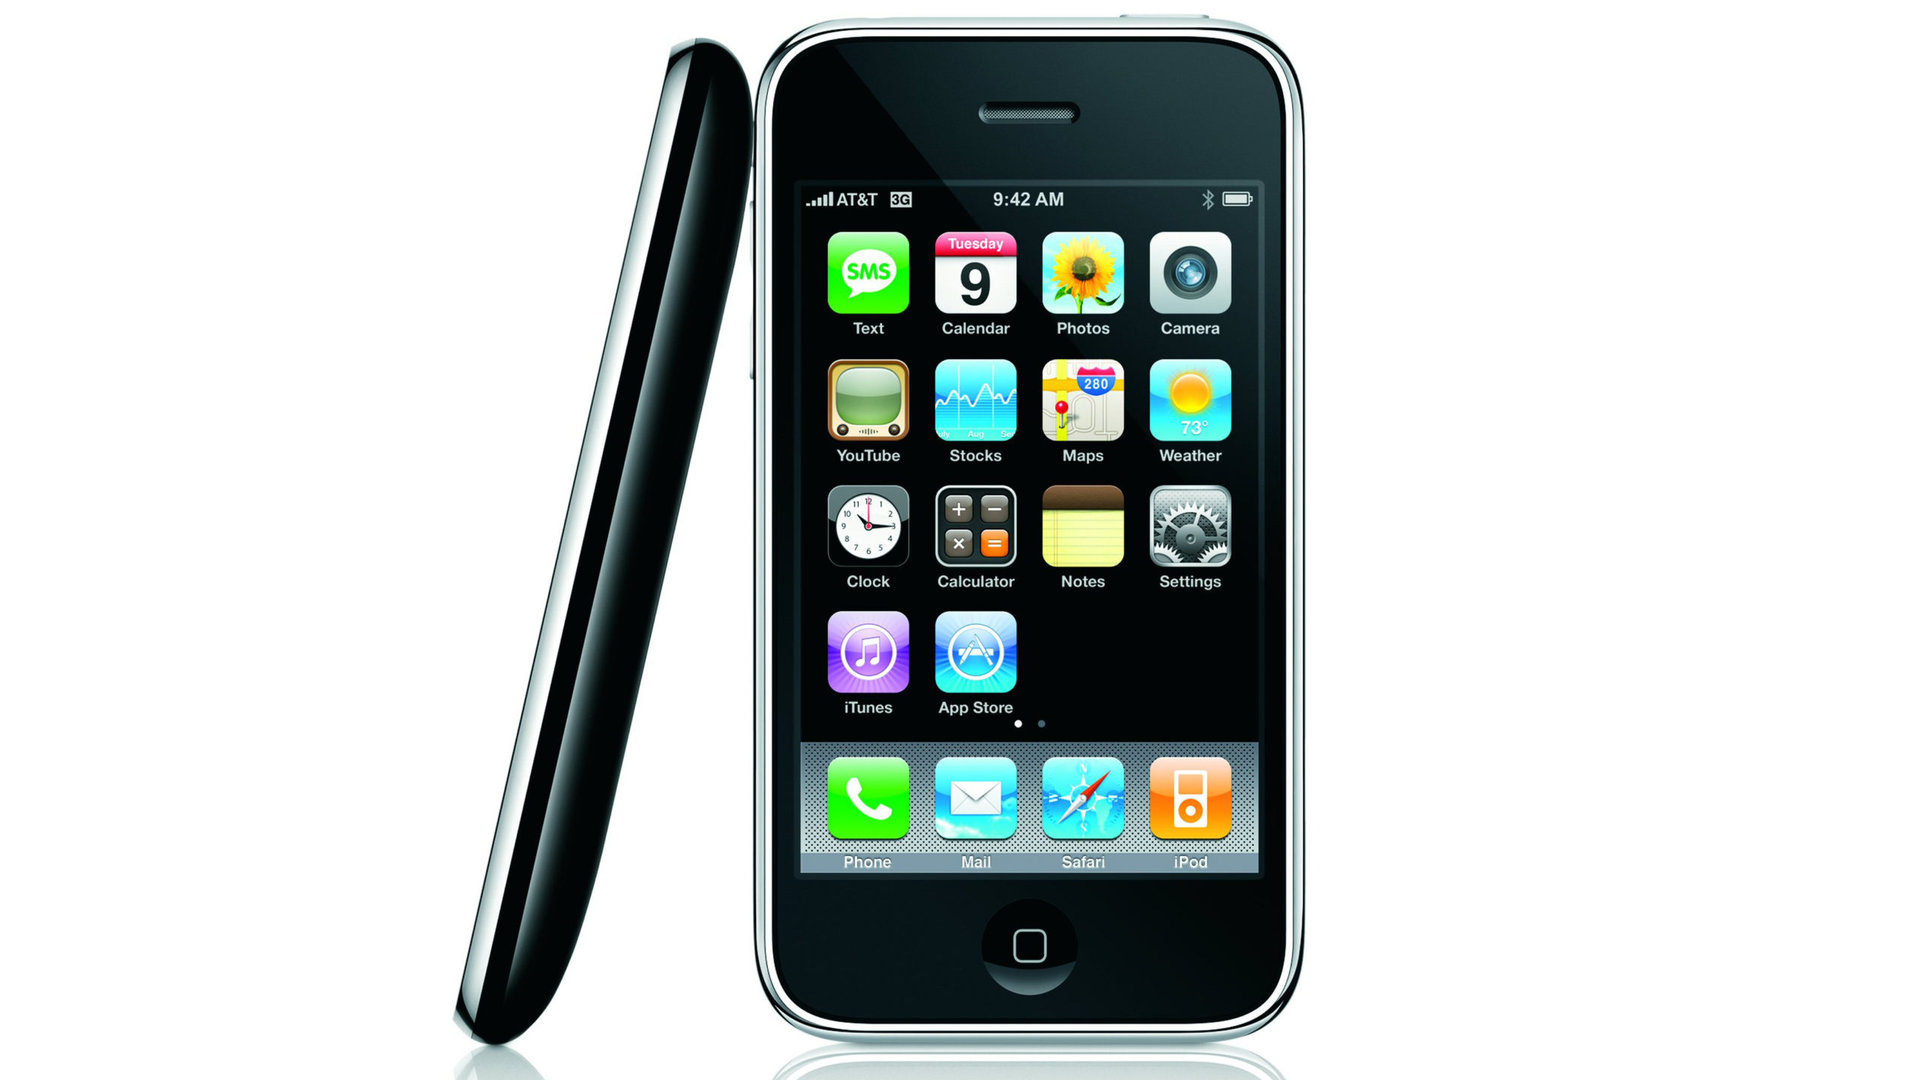 A product photo of the iPhone 3G.